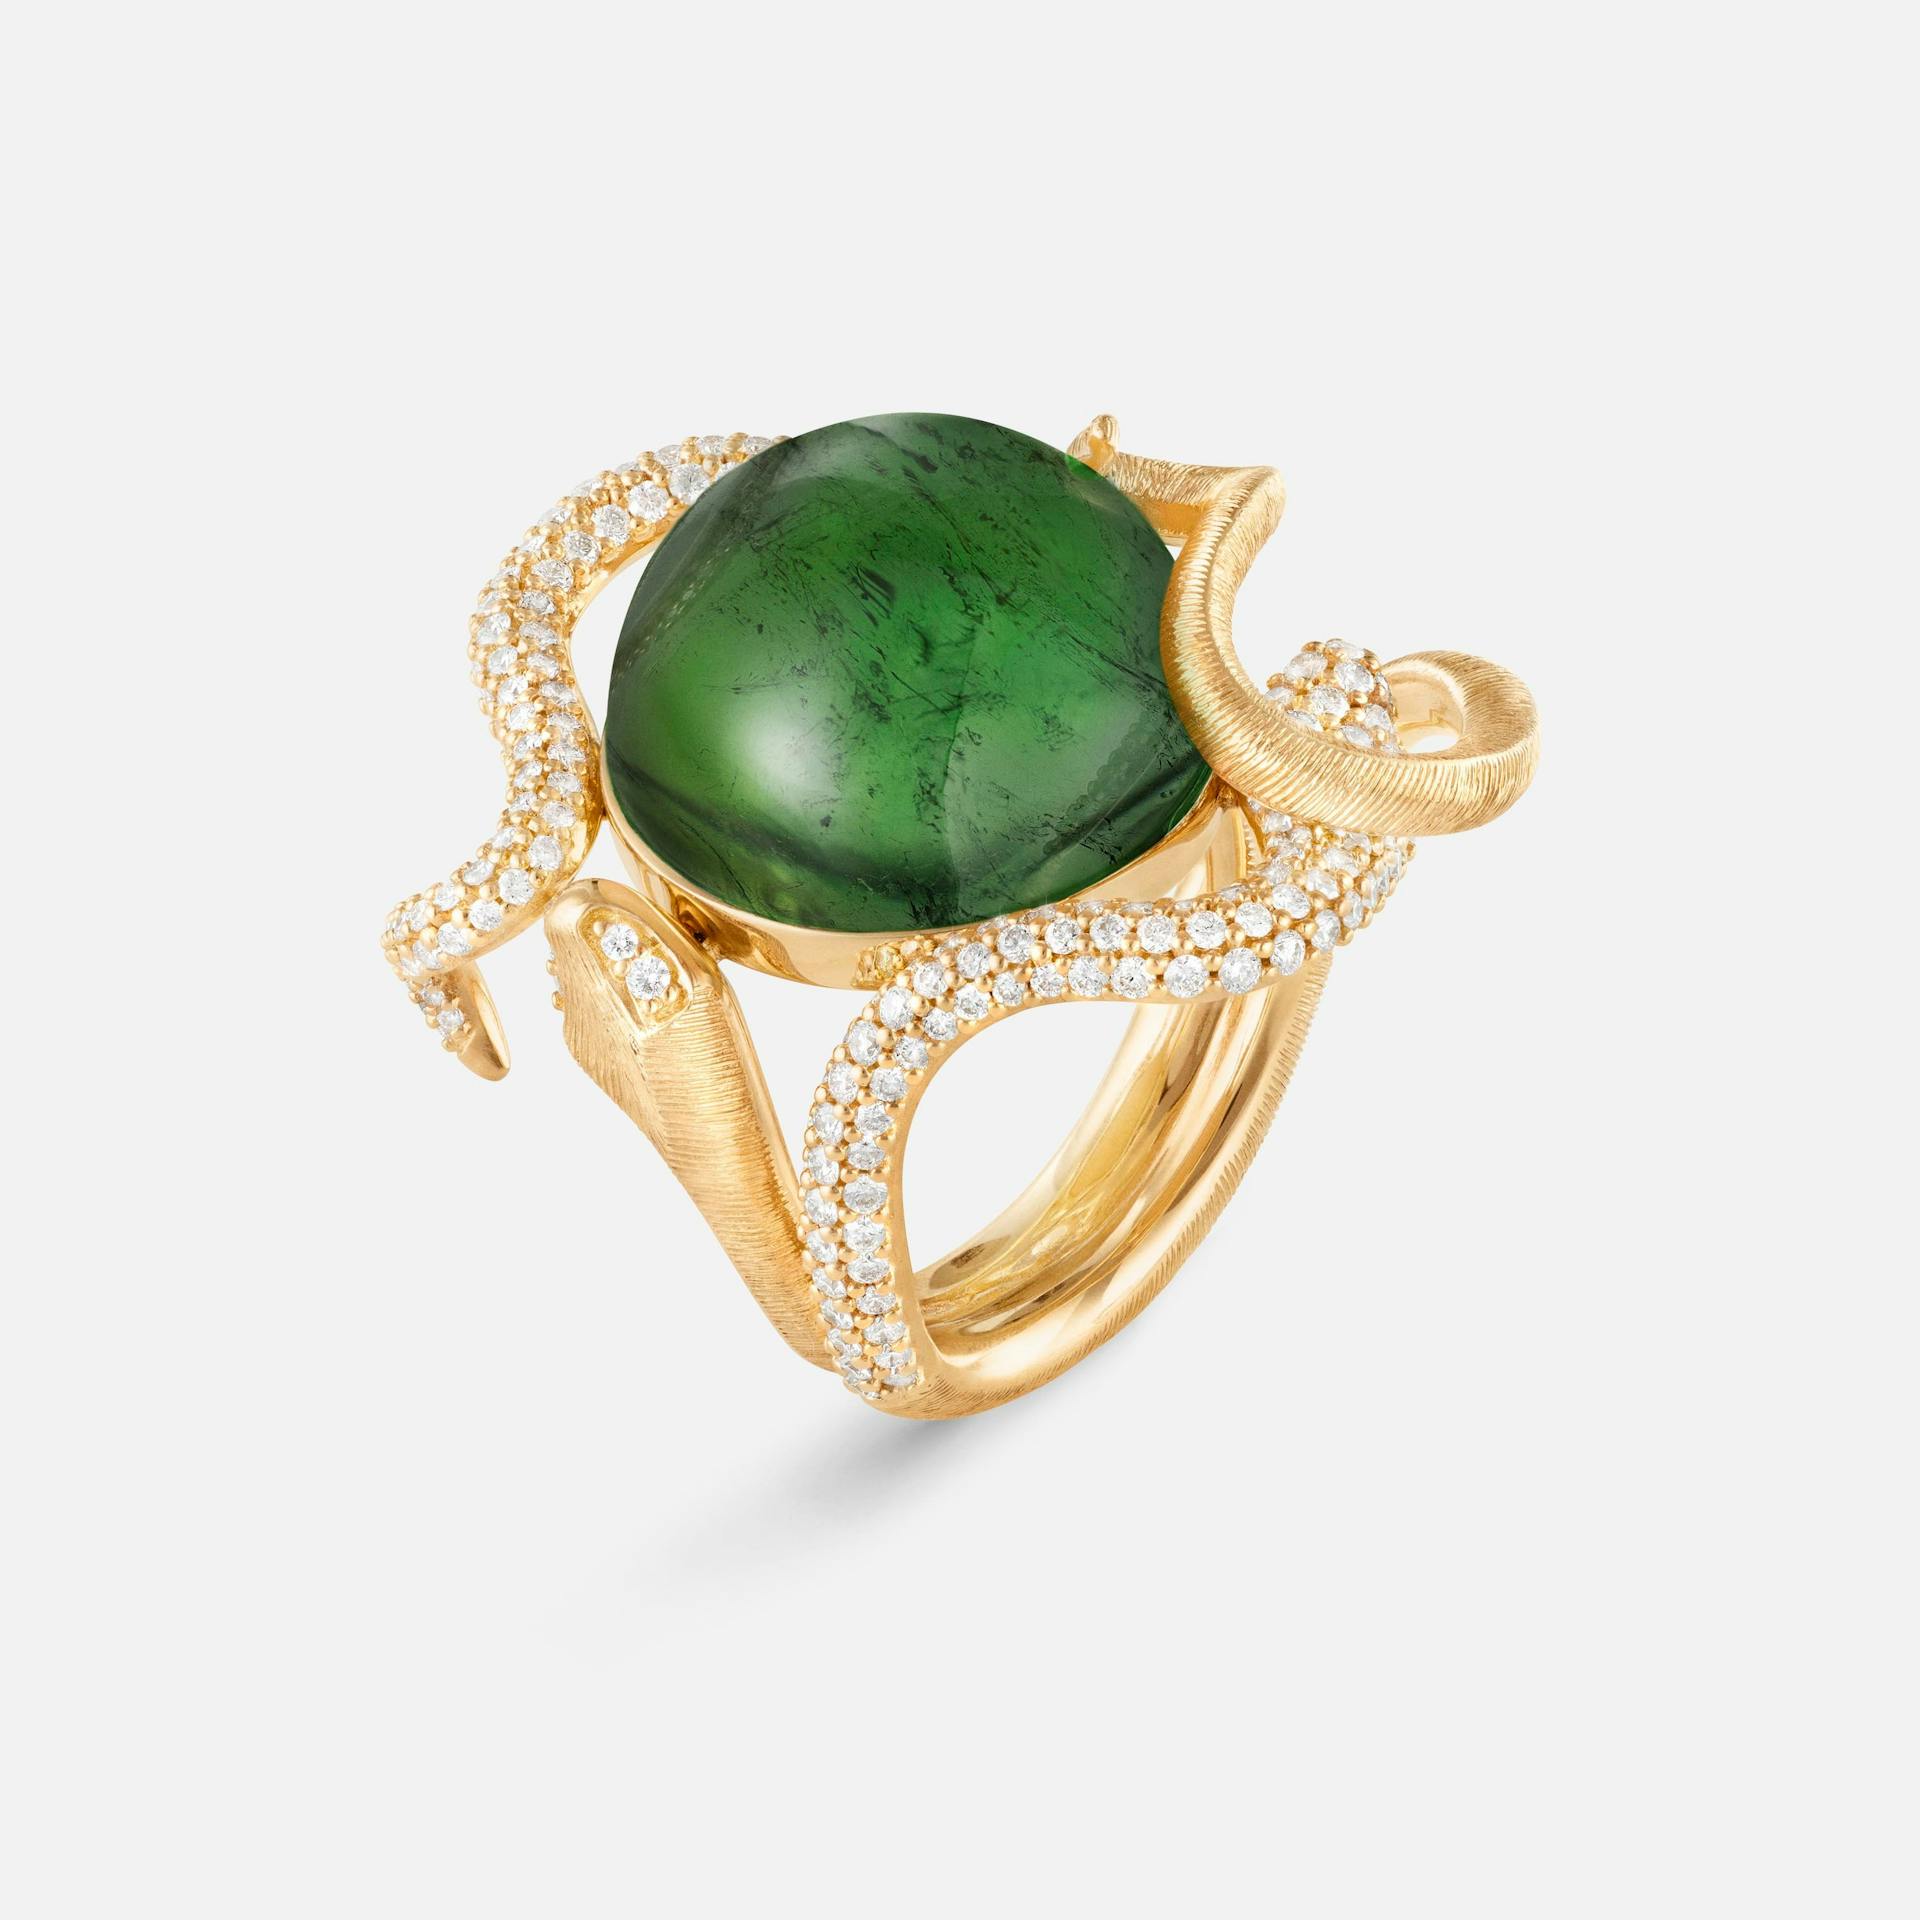 snakes ring pavé 18k gold with green tourmaline and diamonds 0.82 ct. TW.VS.
